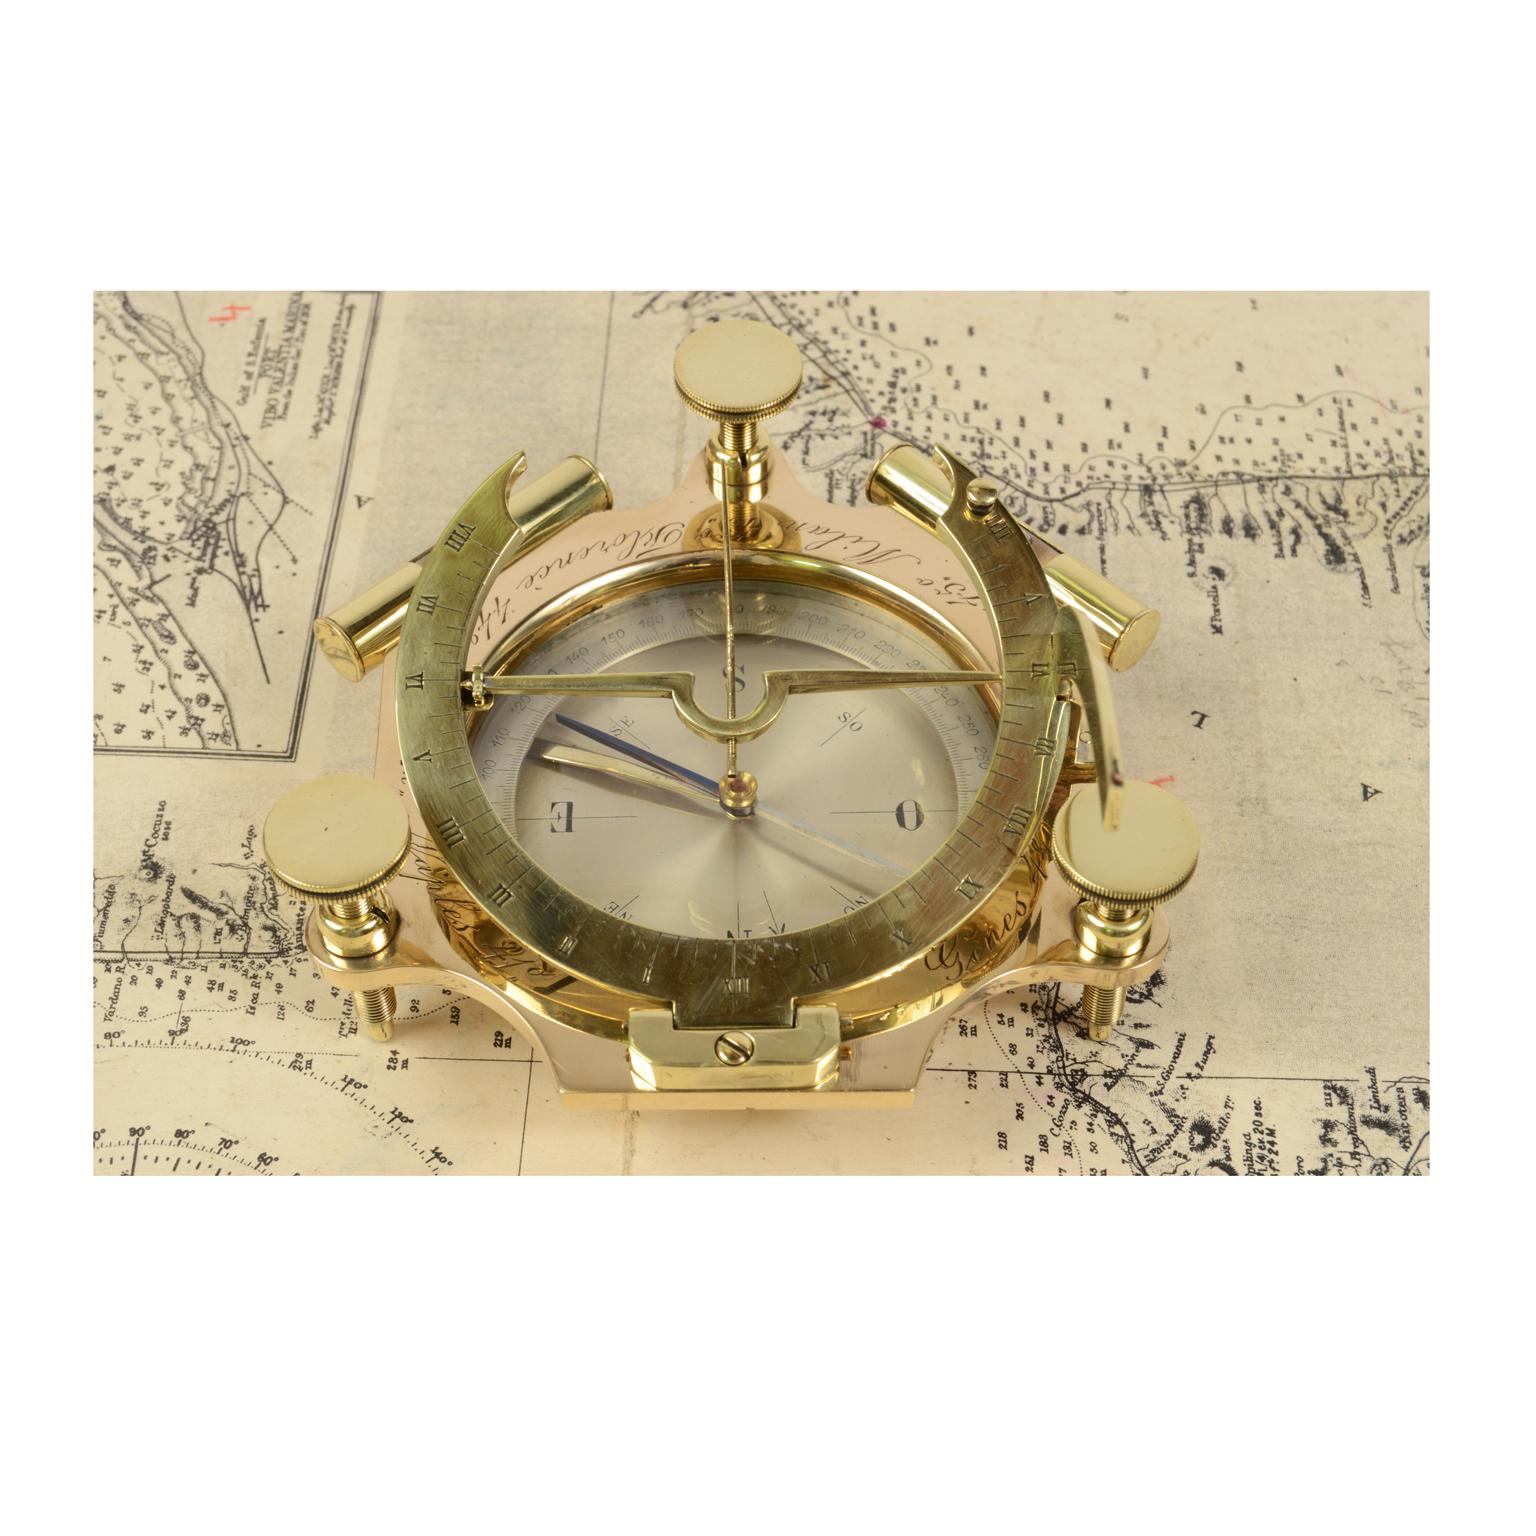 Rare tiltable and lockable equinoctial sundial of engraved brass and glass, complete with case lined with blue velvet. England first half of the 19th century. Excellent condition, fully functional. Box size cm 14.5x13.5x5. 
It is an ancient time